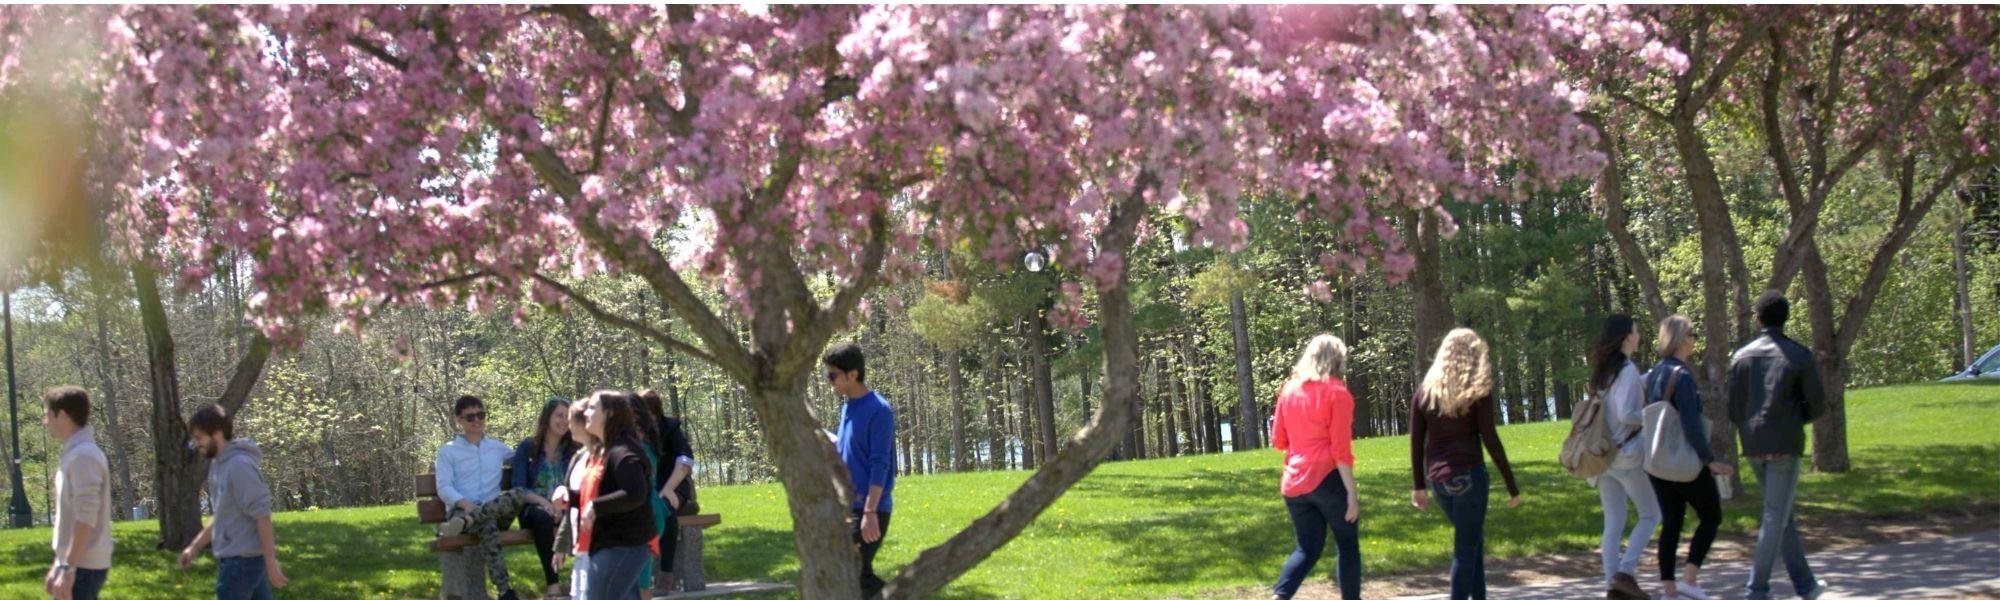 Spring blossoms on campus with students walking